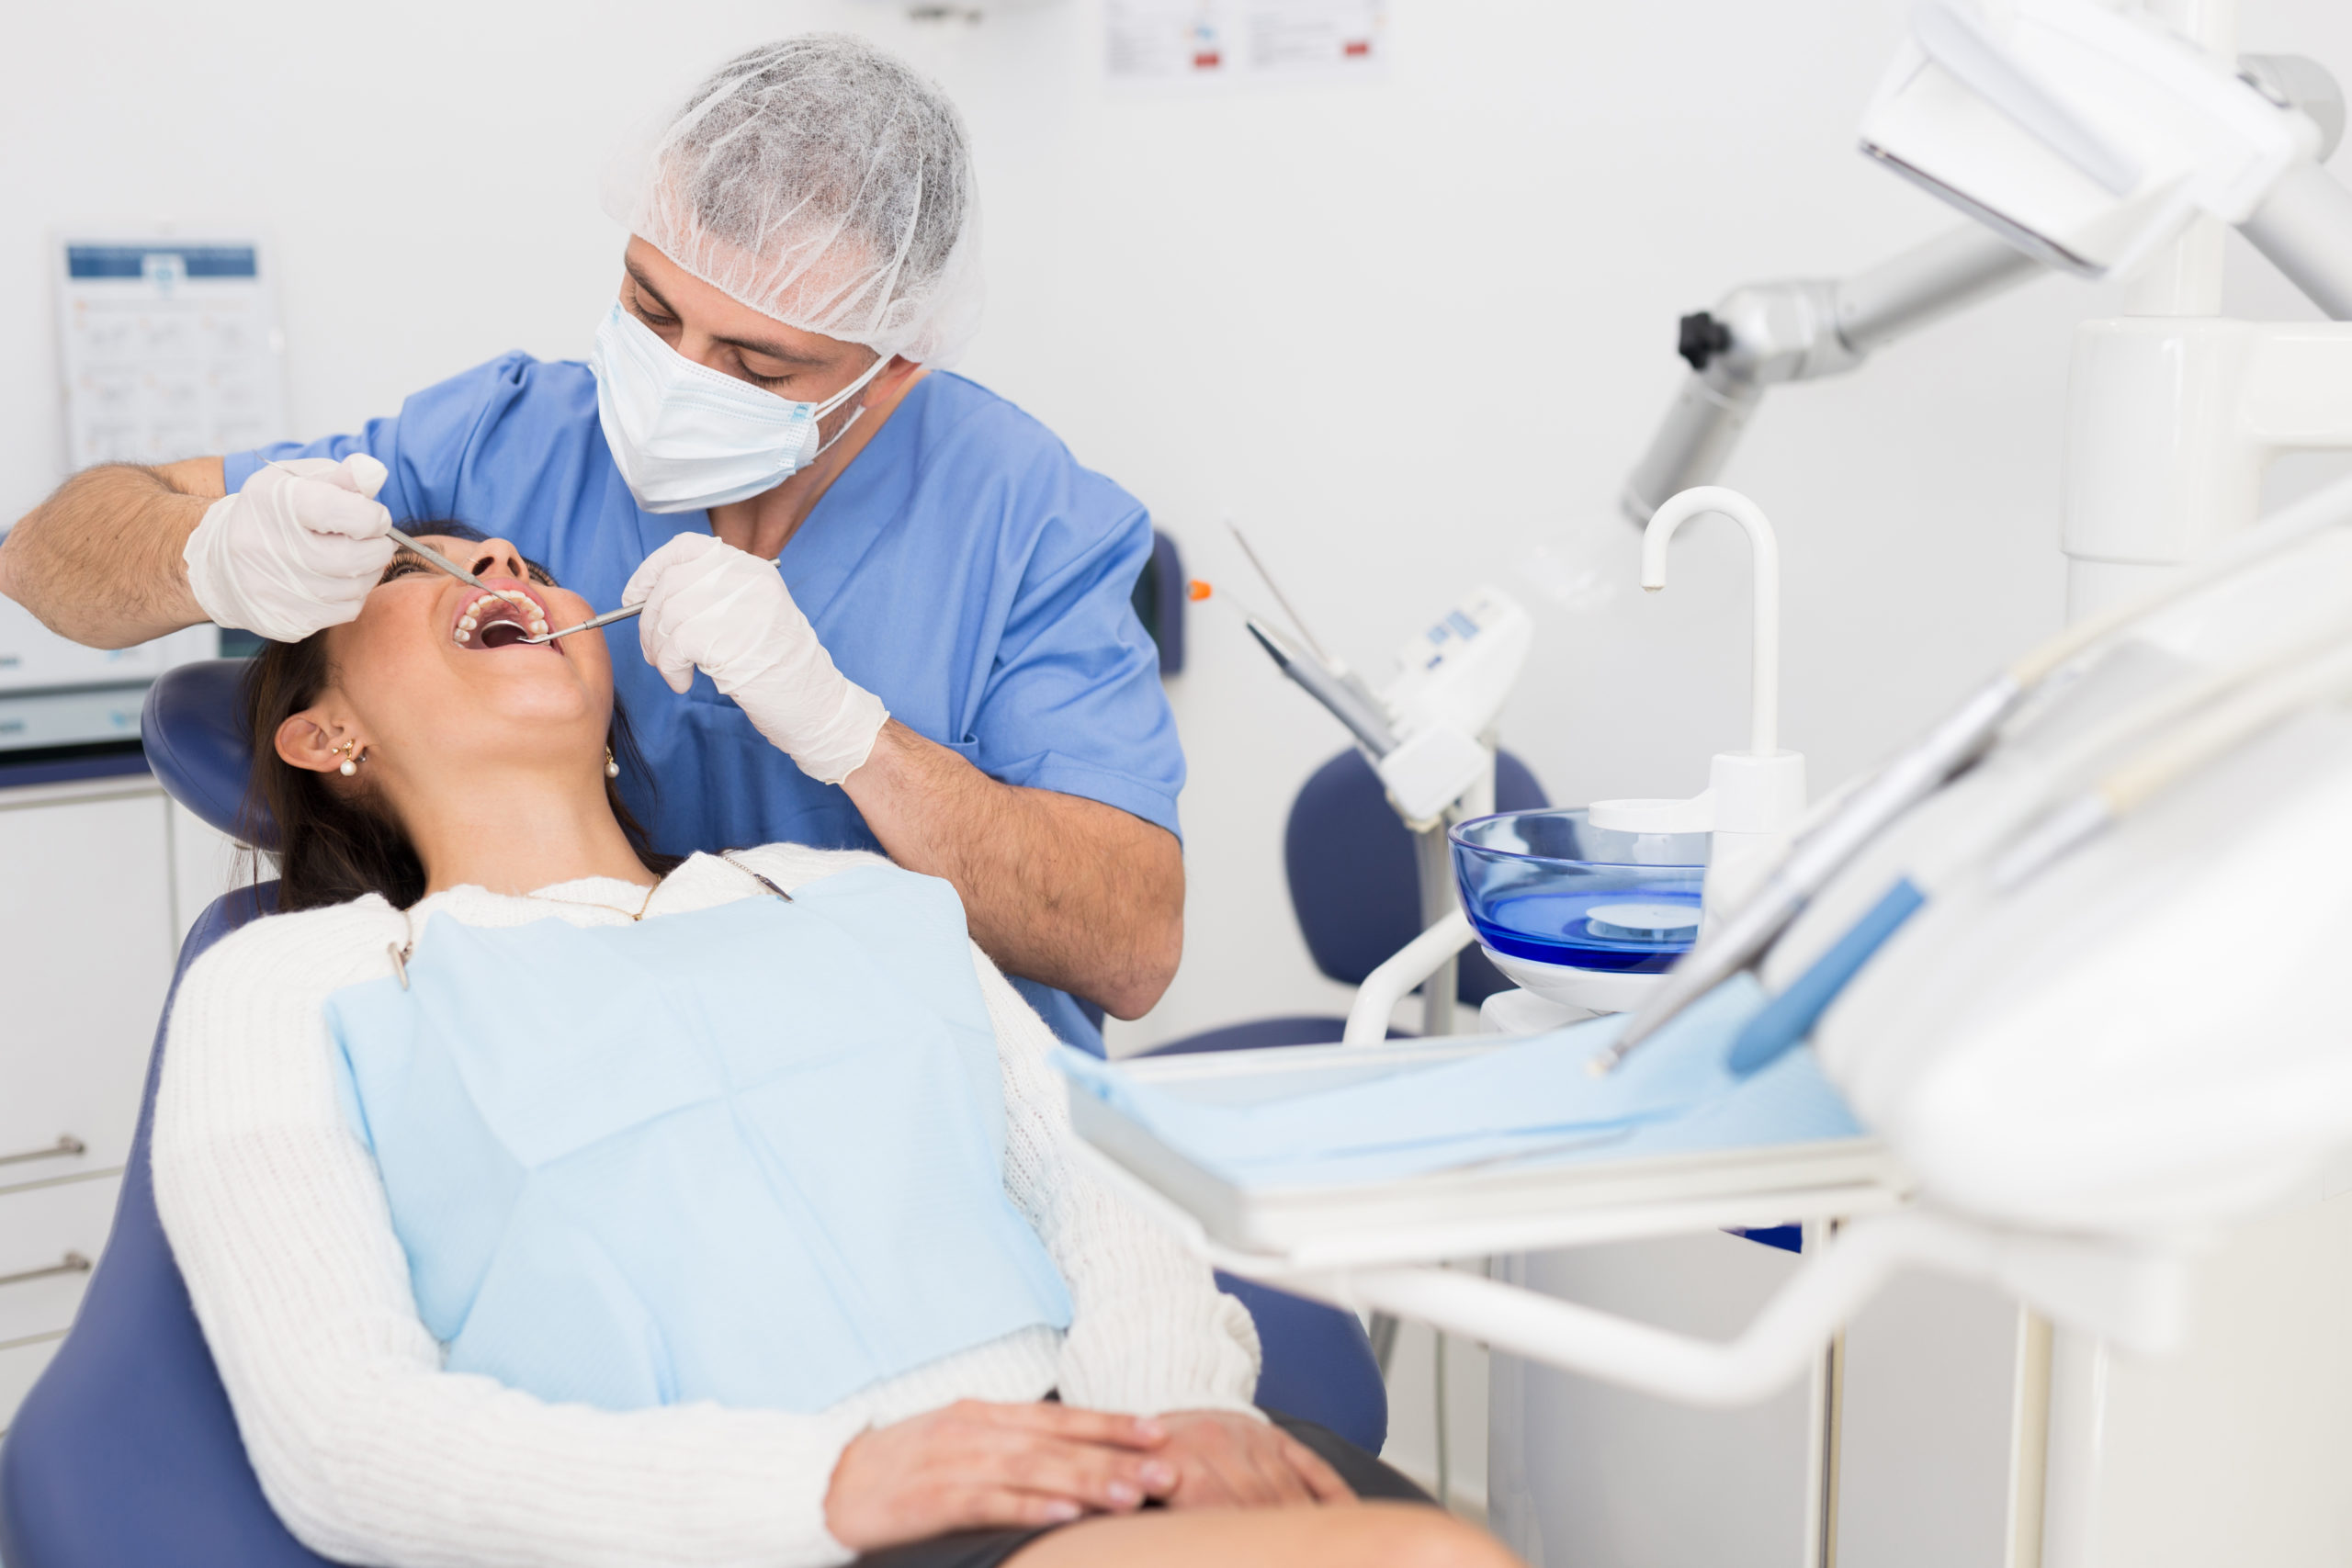 A dentist evaluates a patient's teeth in a dental office.